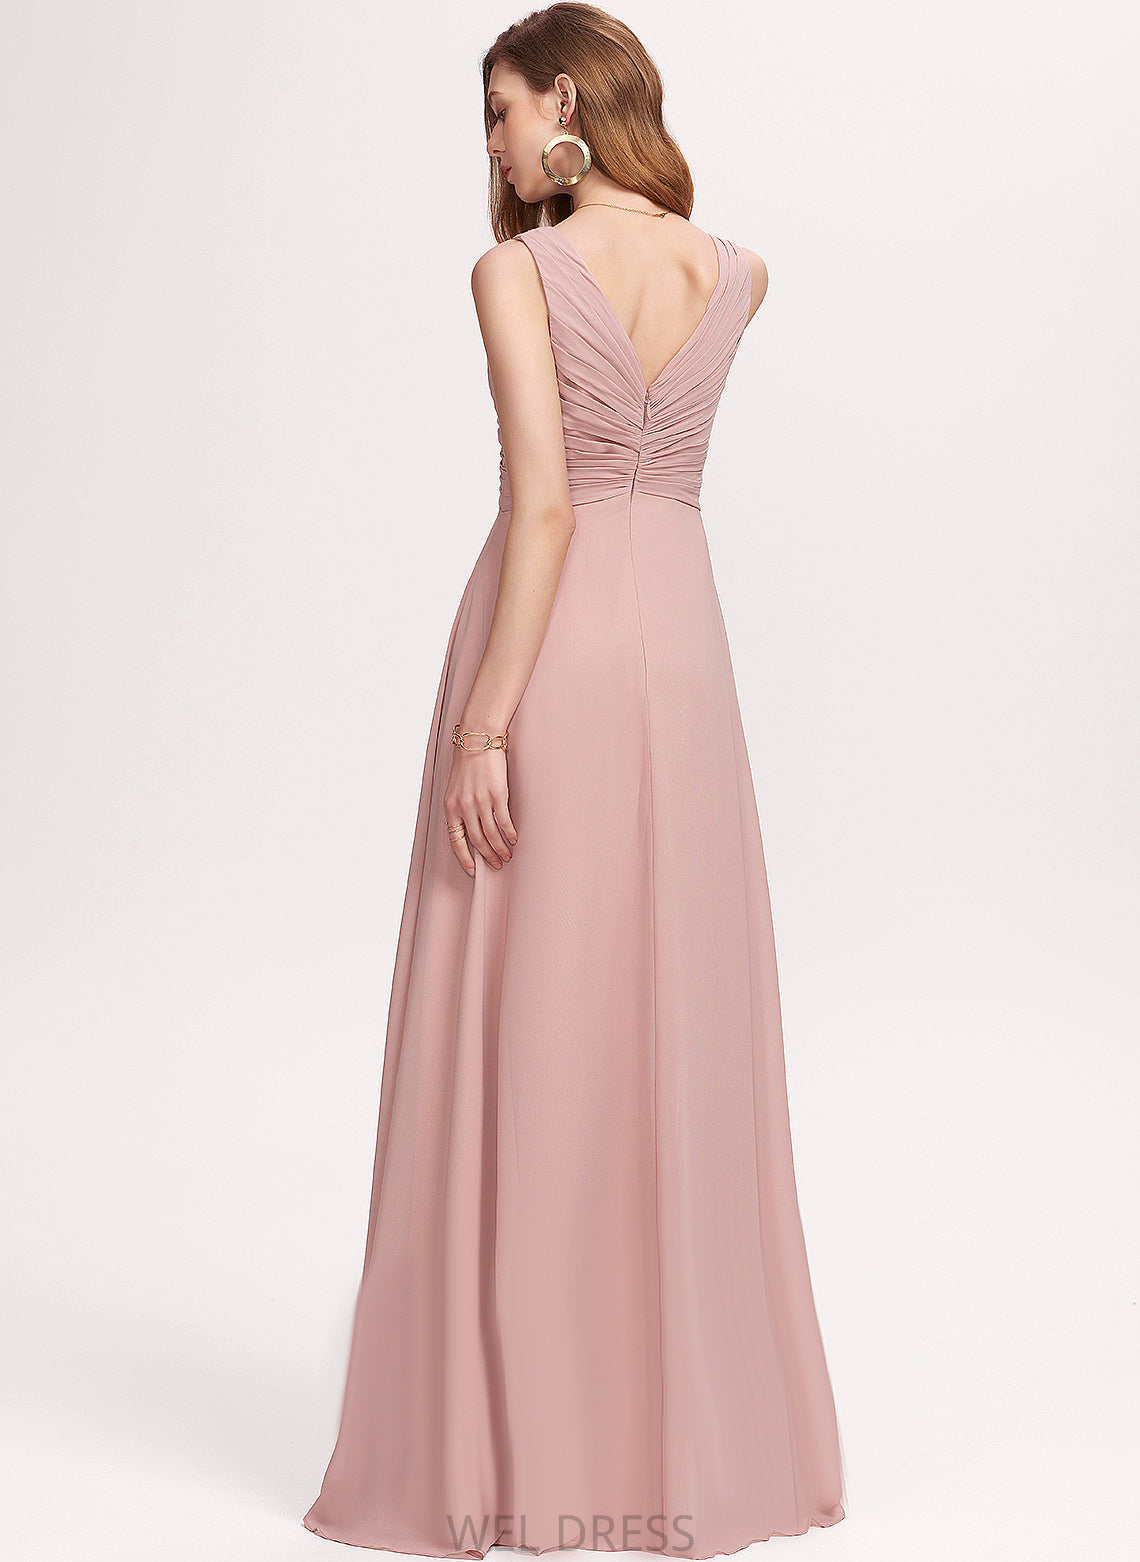 Pleated Floor-Length V-neck Belinda Chiffon A-Line Prom Dresses With